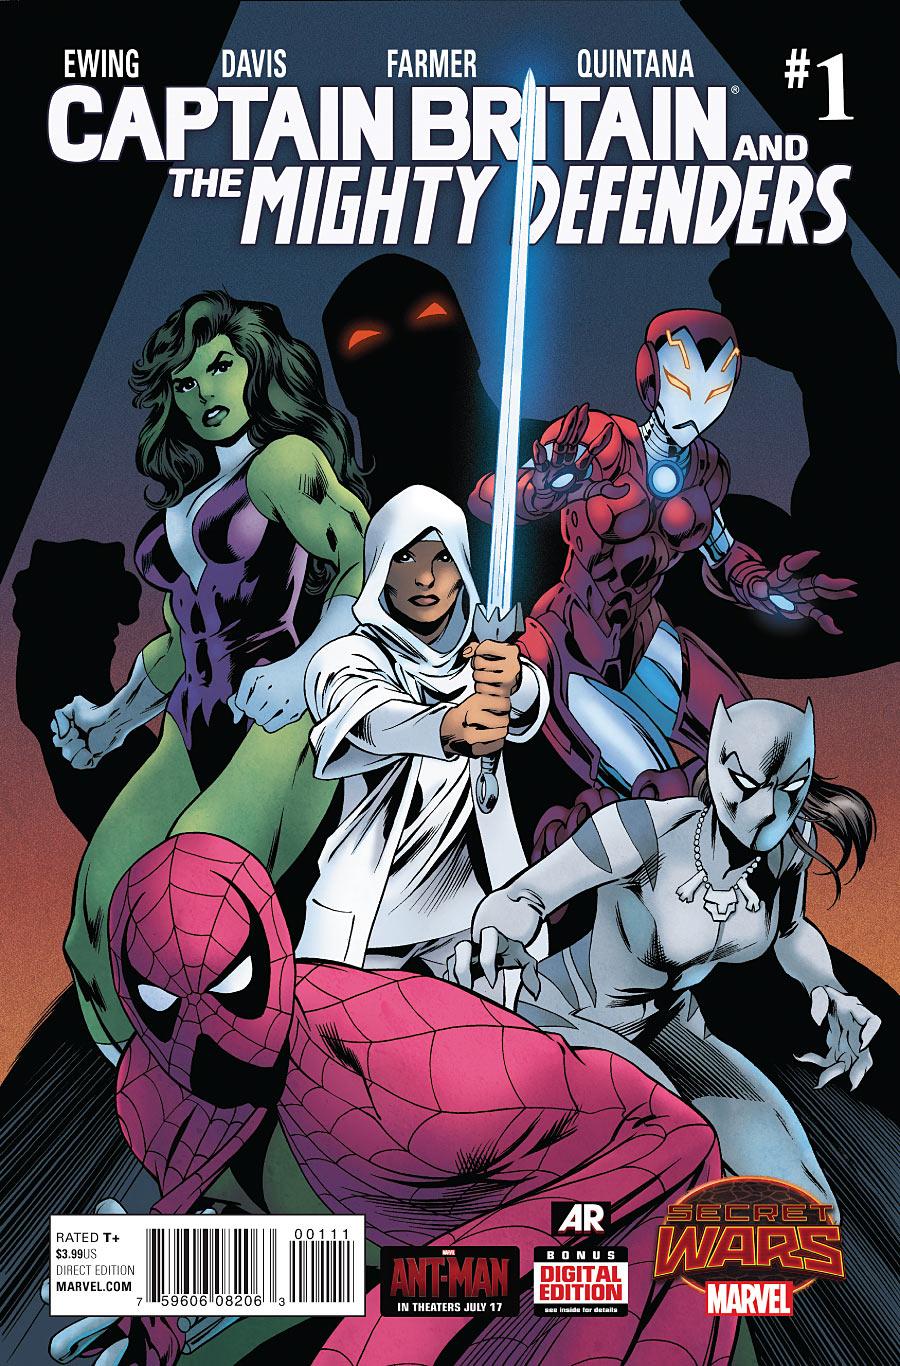 Captain Britain and the Mighty Defenders Vol. 1 #1